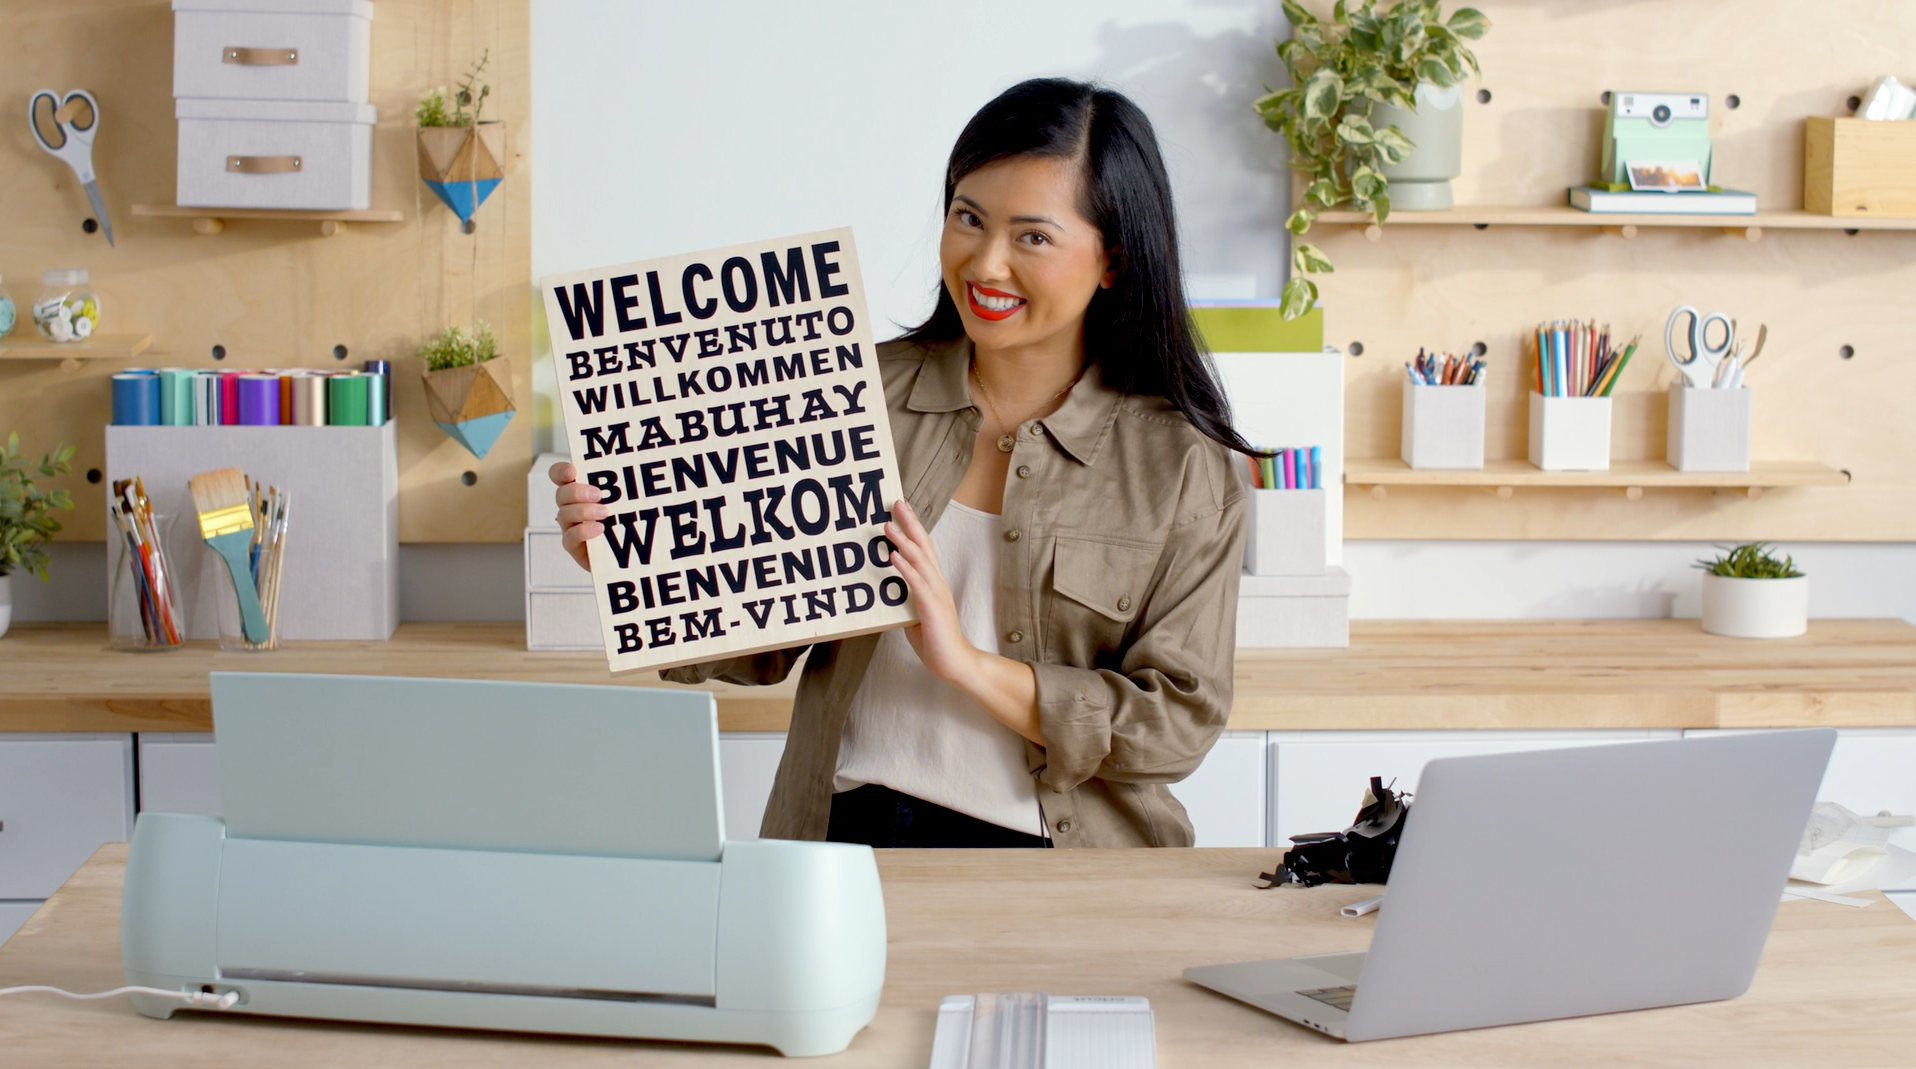 How to make custom welcome signs with Cricut